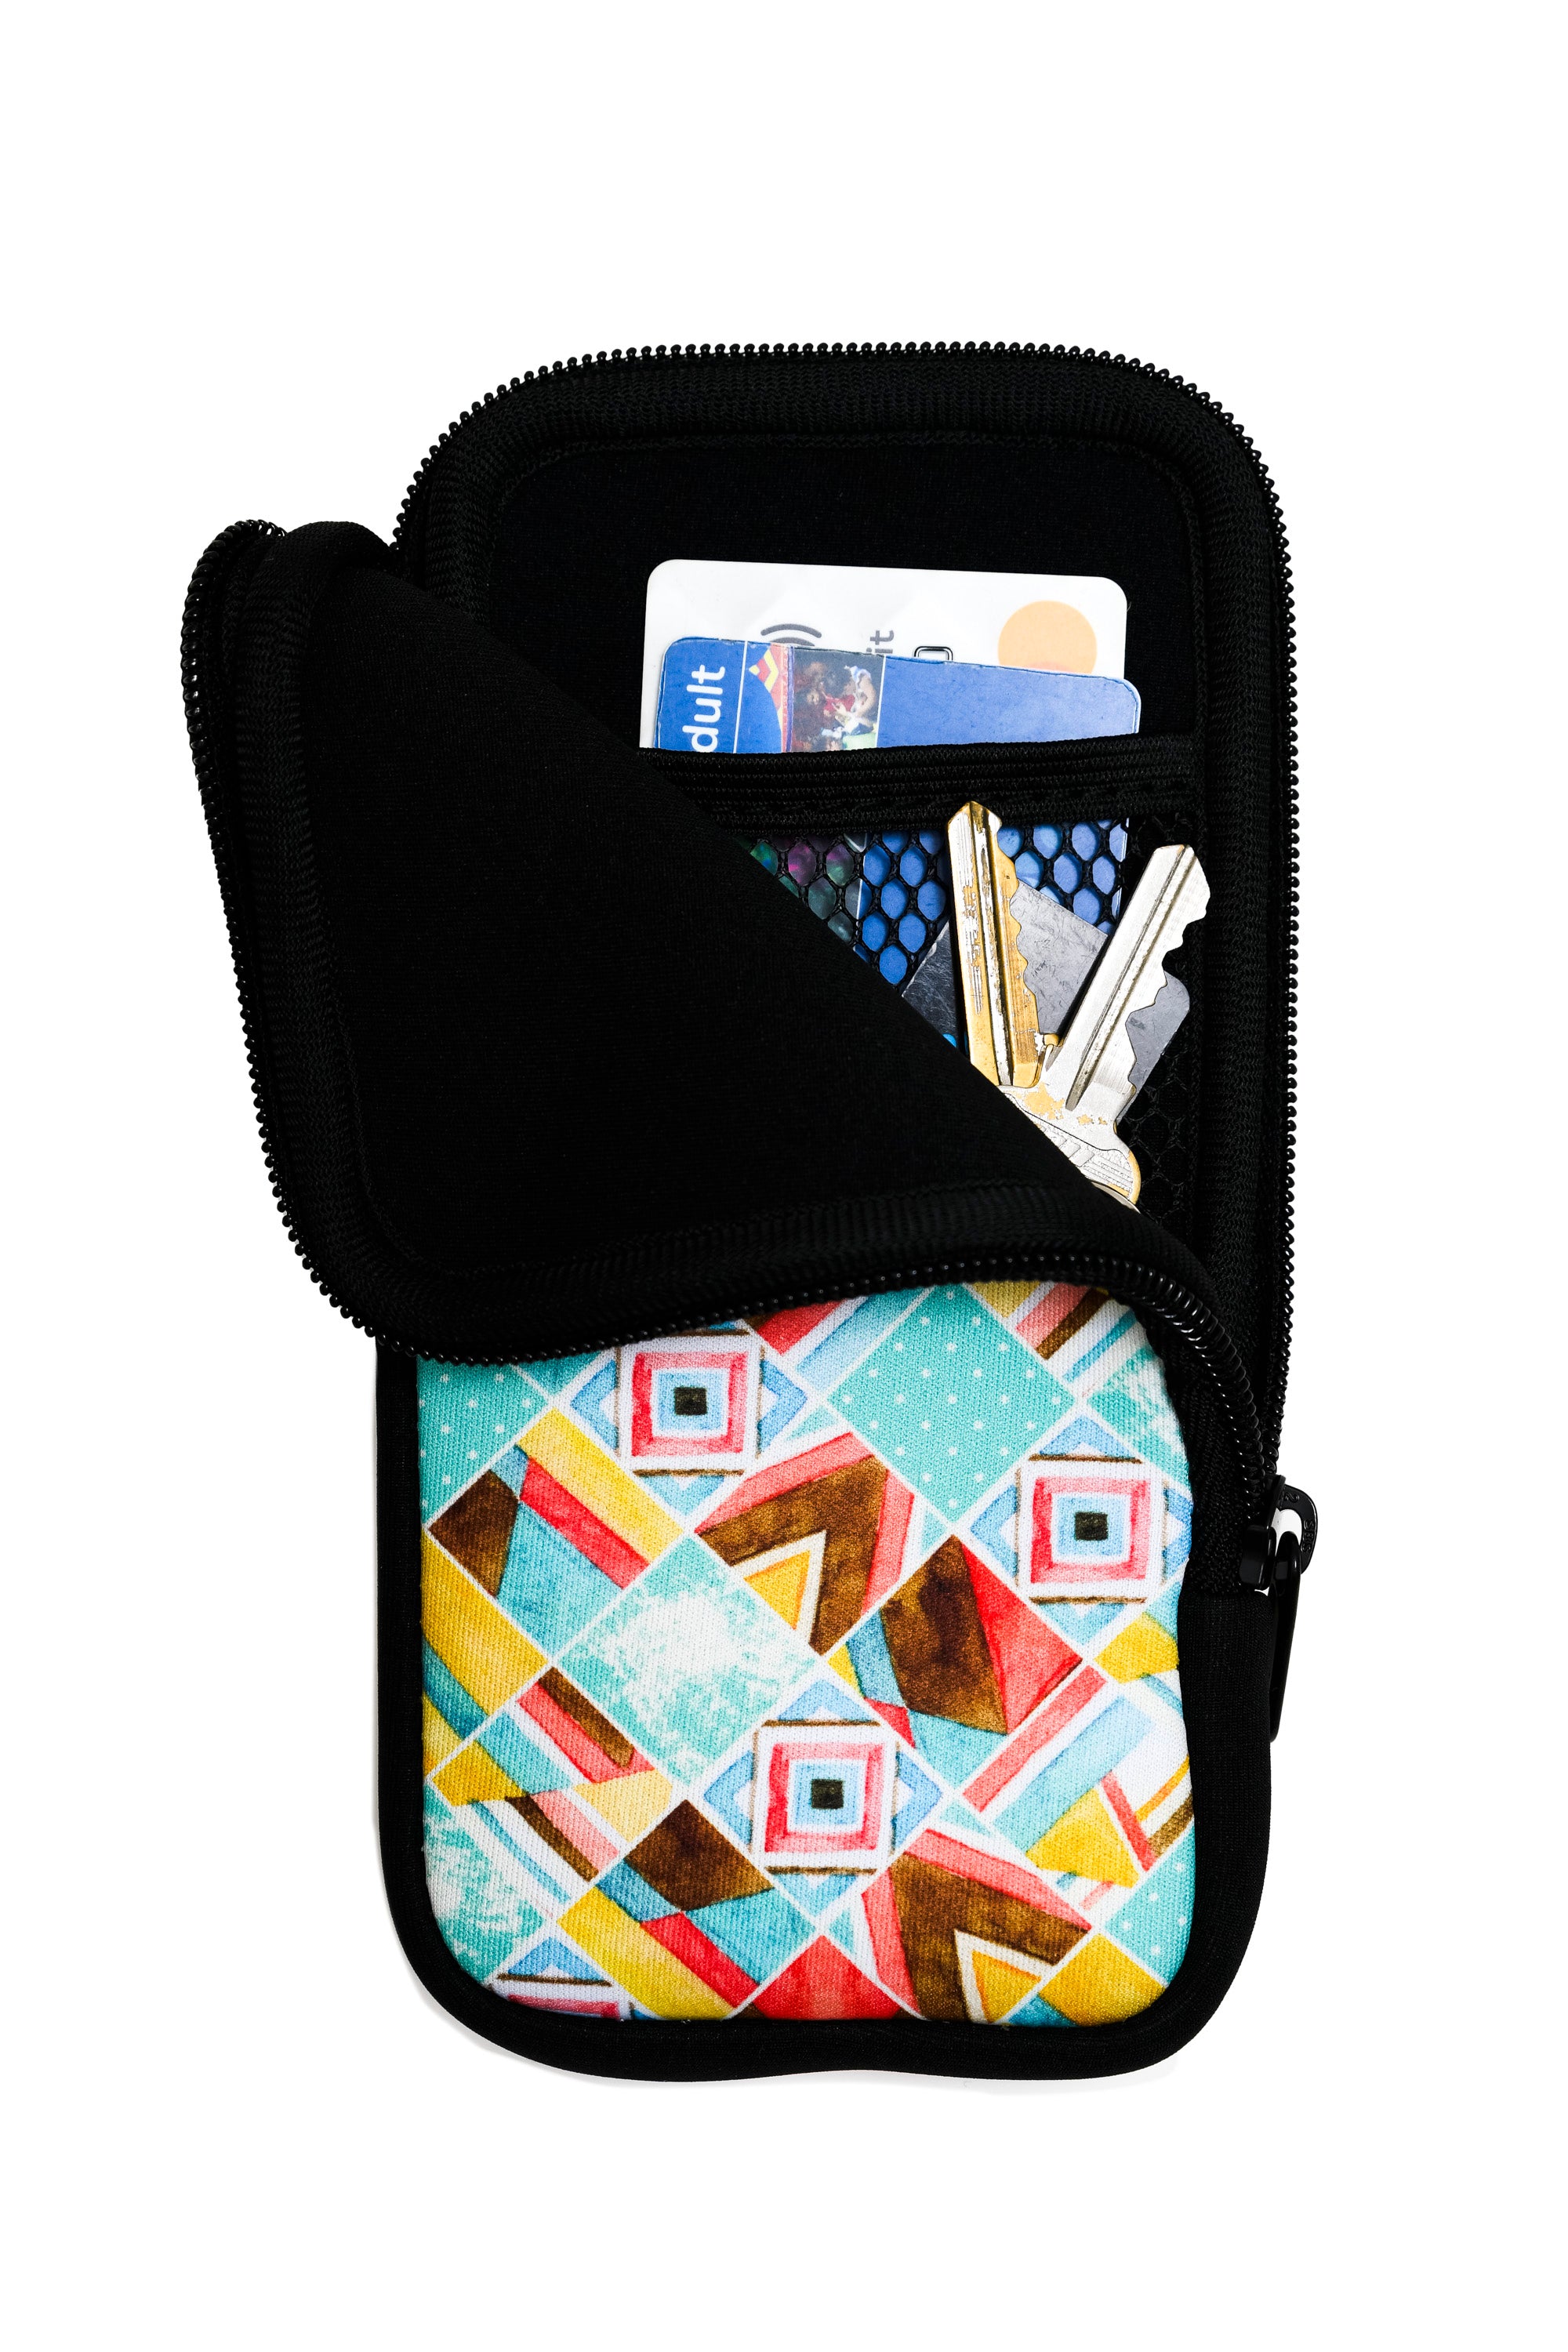 Travel Pouch with Detachable Lanyard - Square Patterns